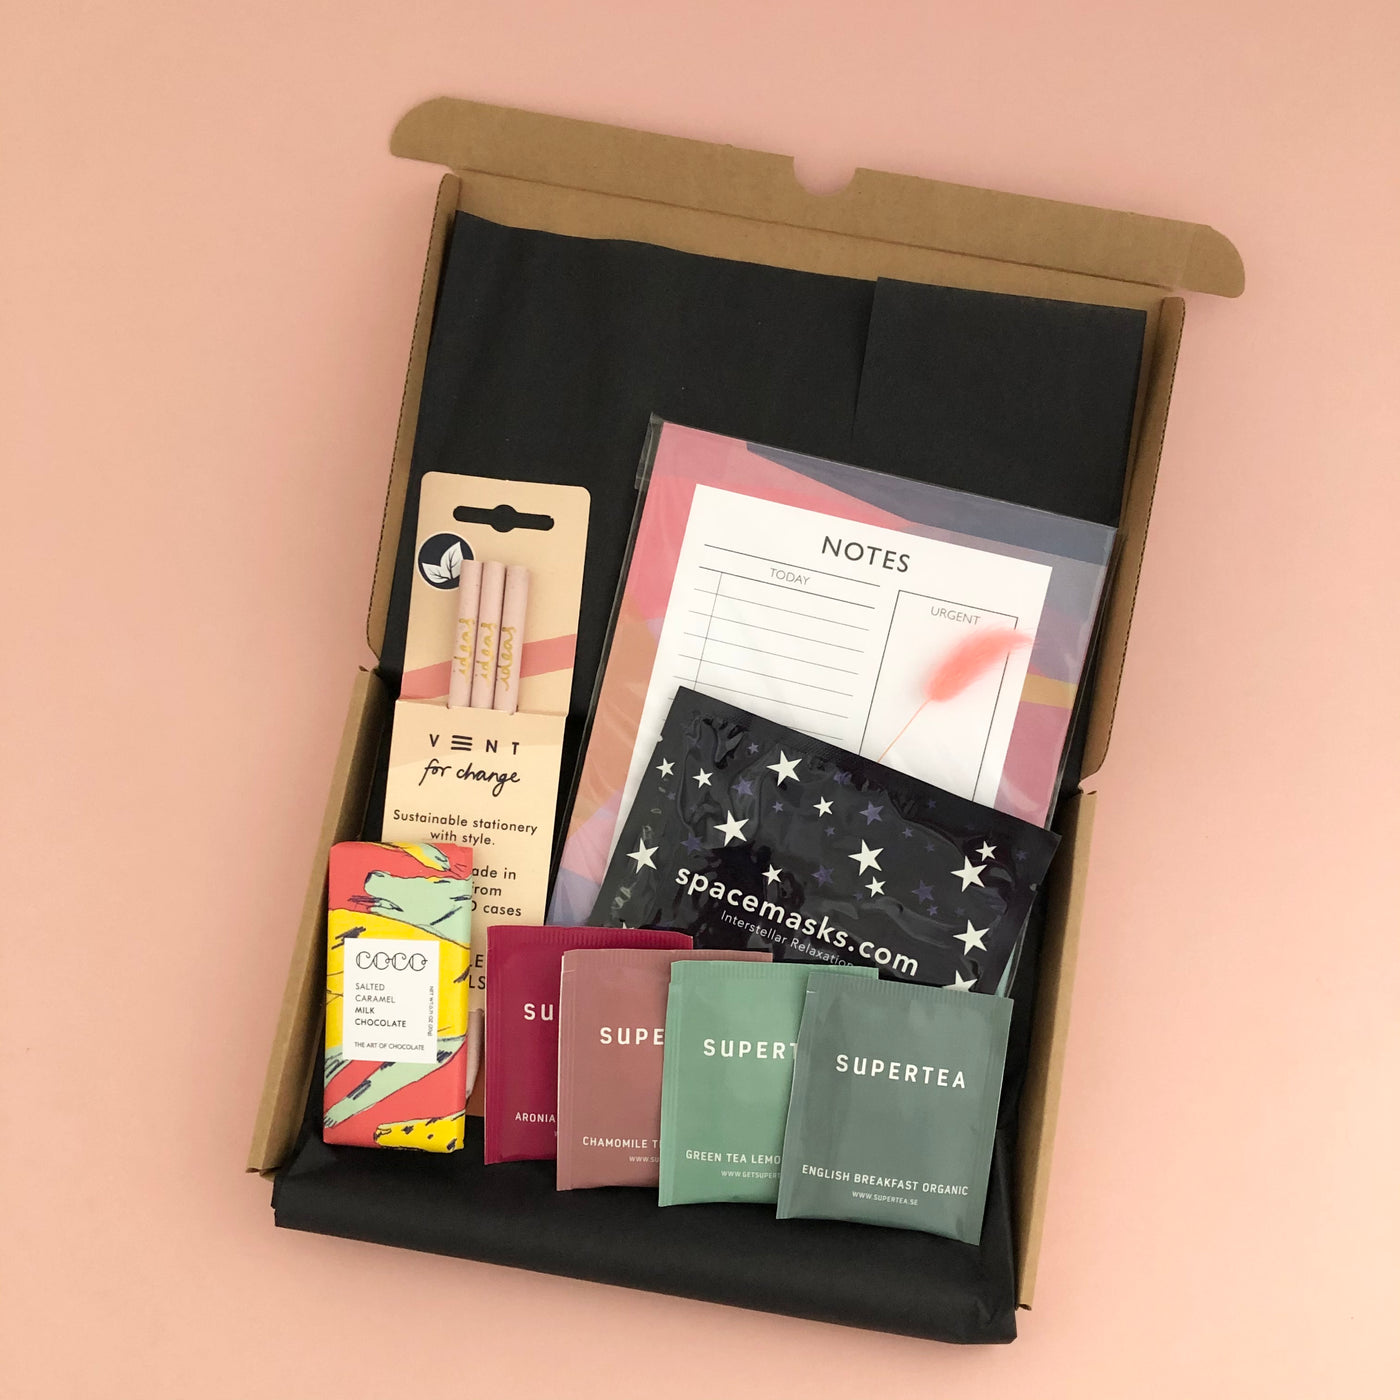 Letterbox friendly get organised gift box contians A5 to do list from Mock up designs, Self heating eye mask from Spacemasks, Artisan salted caramel mini bar from coco chocolatier, 4 sachets of organic tea from supertea, and pack of 3 light pink recycled pencils from vent 4 change